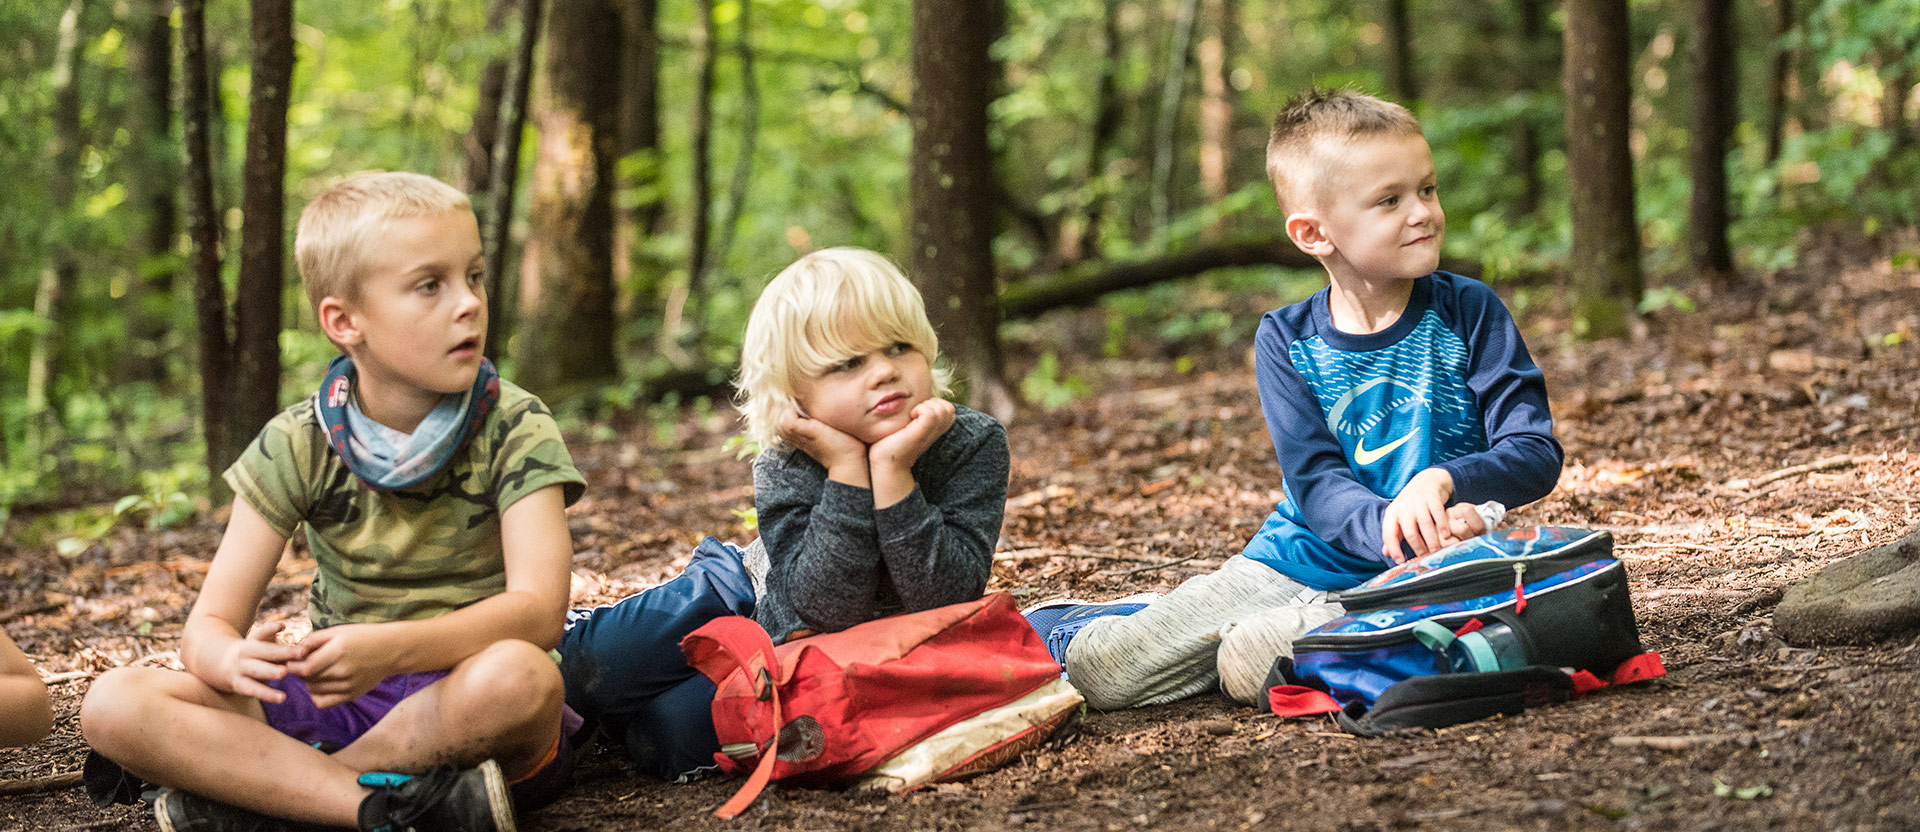 Three young boys seated in the forest beginning their nature connection mentoring journey